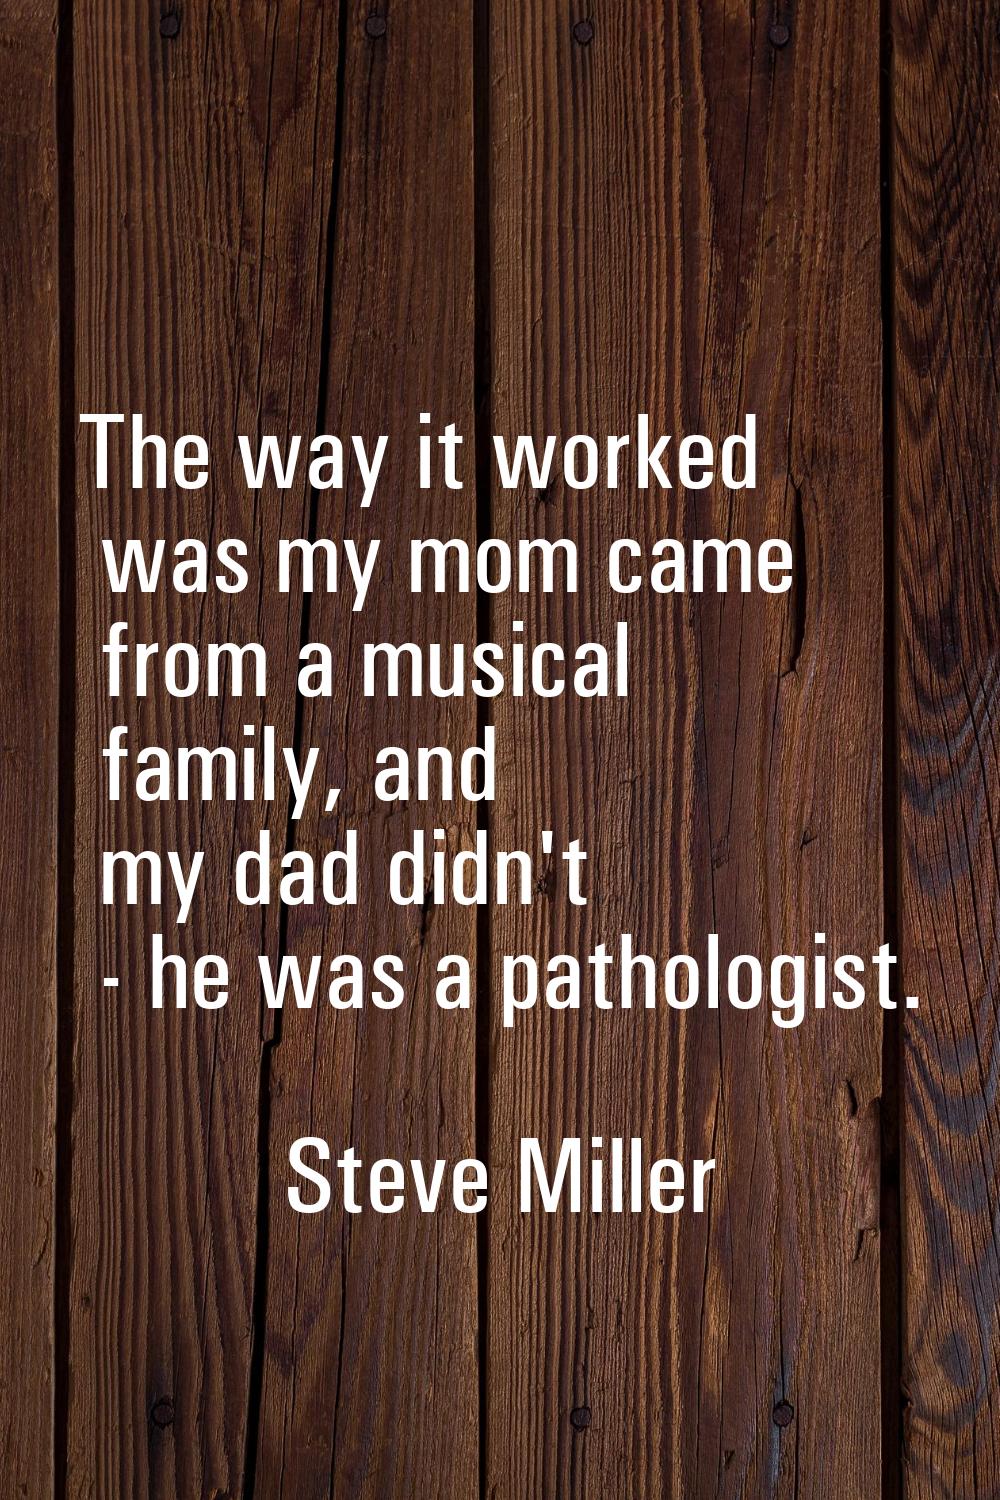 The way it worked was my mom came from a musical family, and my dad didn't - he was a pathologist.